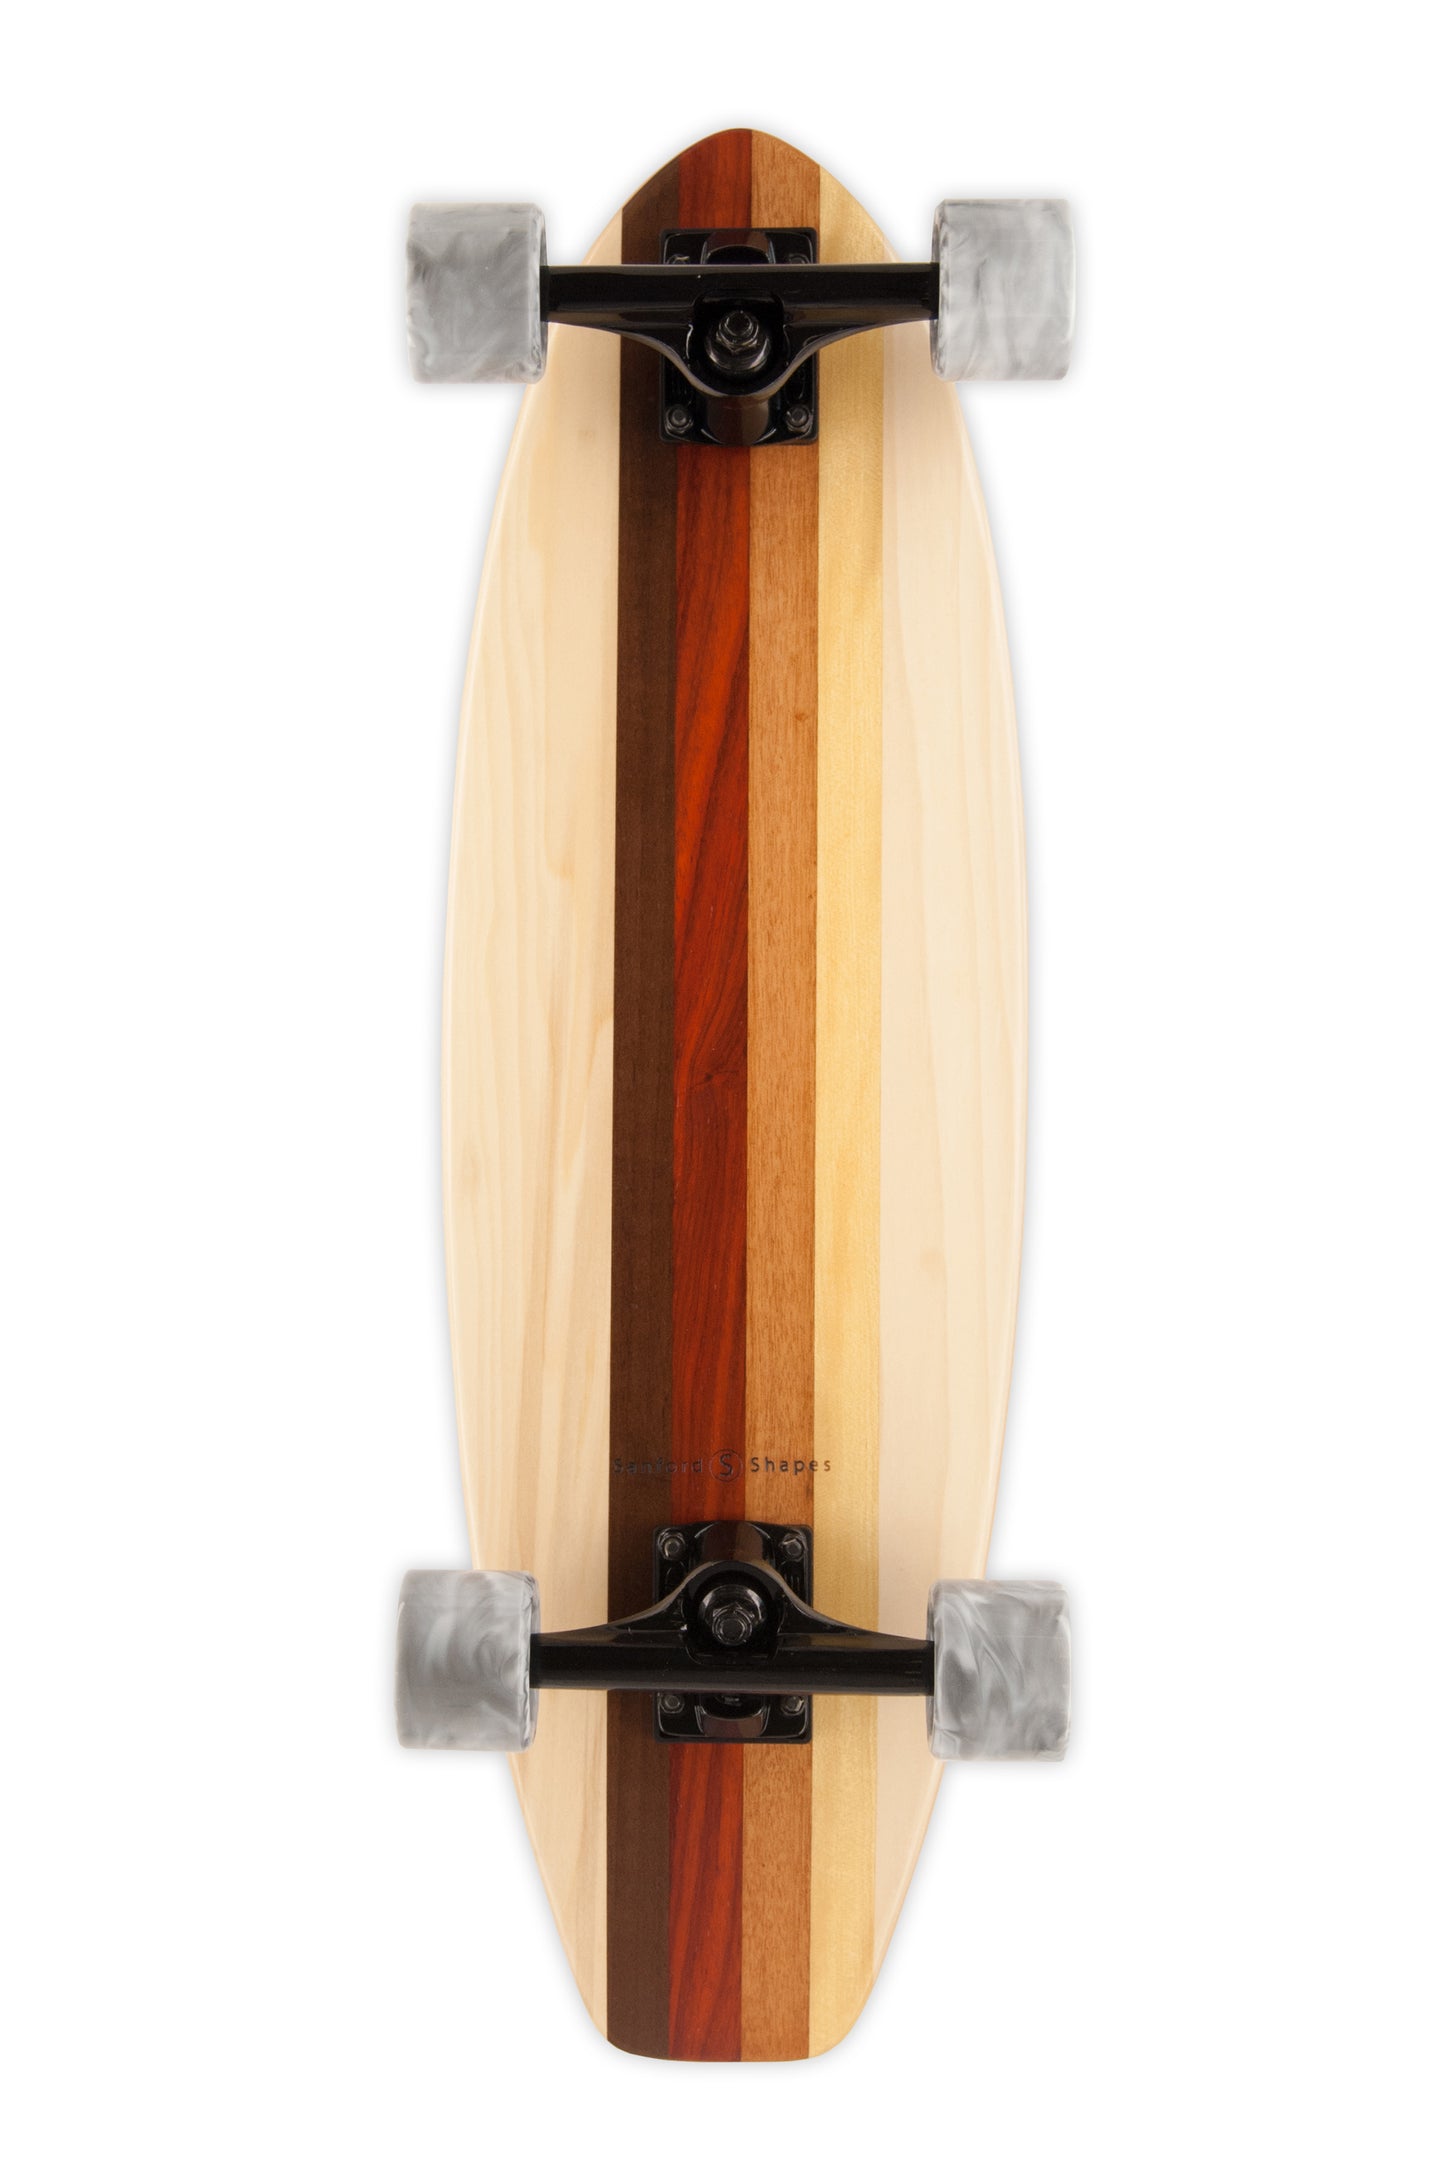 LINEUP SMALL COMPLETE SKATEBOARD 27.5"